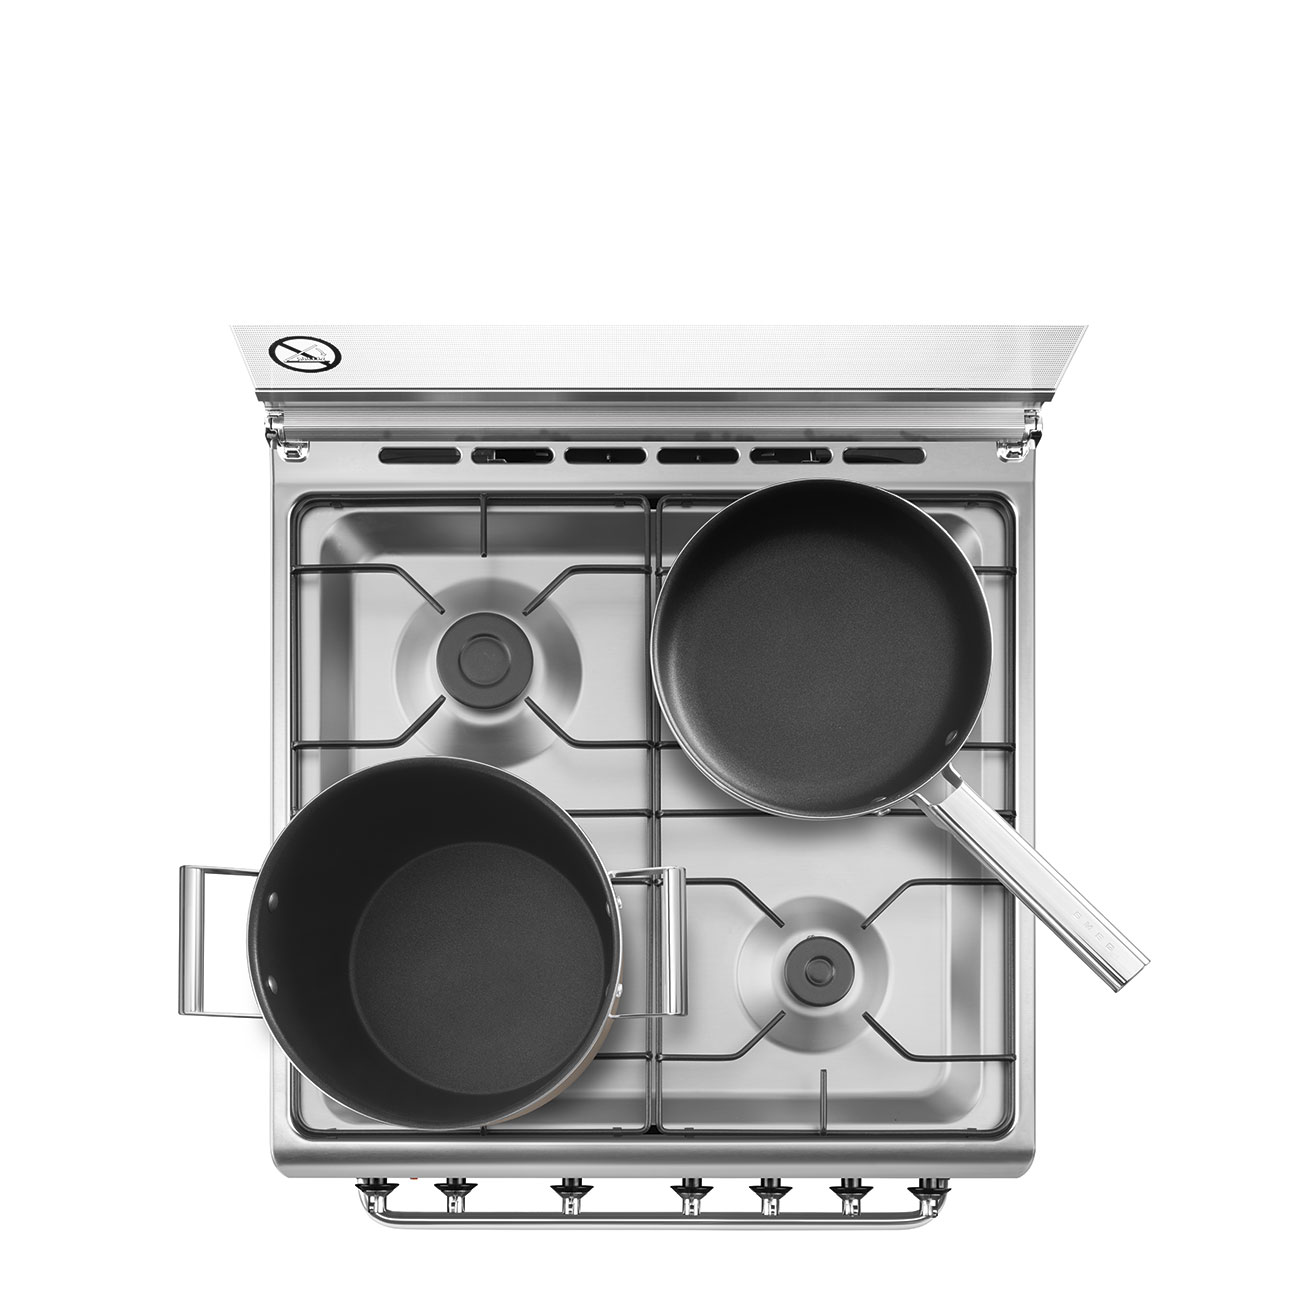 Smeg Stainless steel Cooker with Gas Hob_8